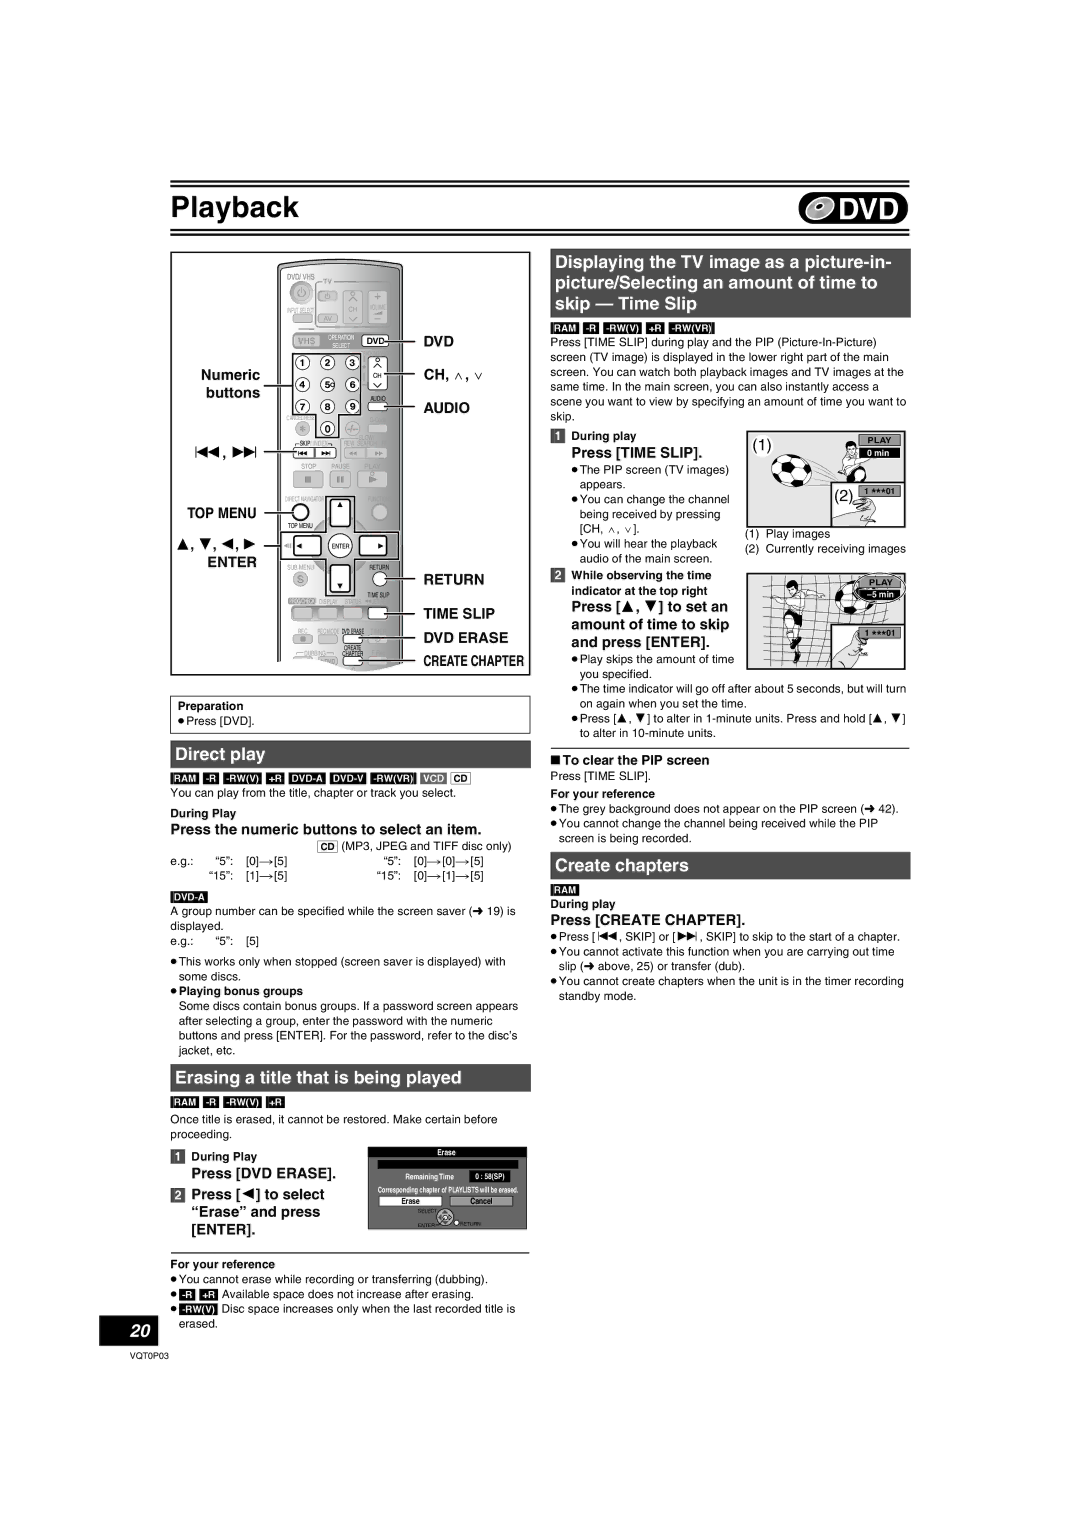 Panasonic DMR-ES30V operating instructions Direct play, Create chapters, Erasing a title that is being played 